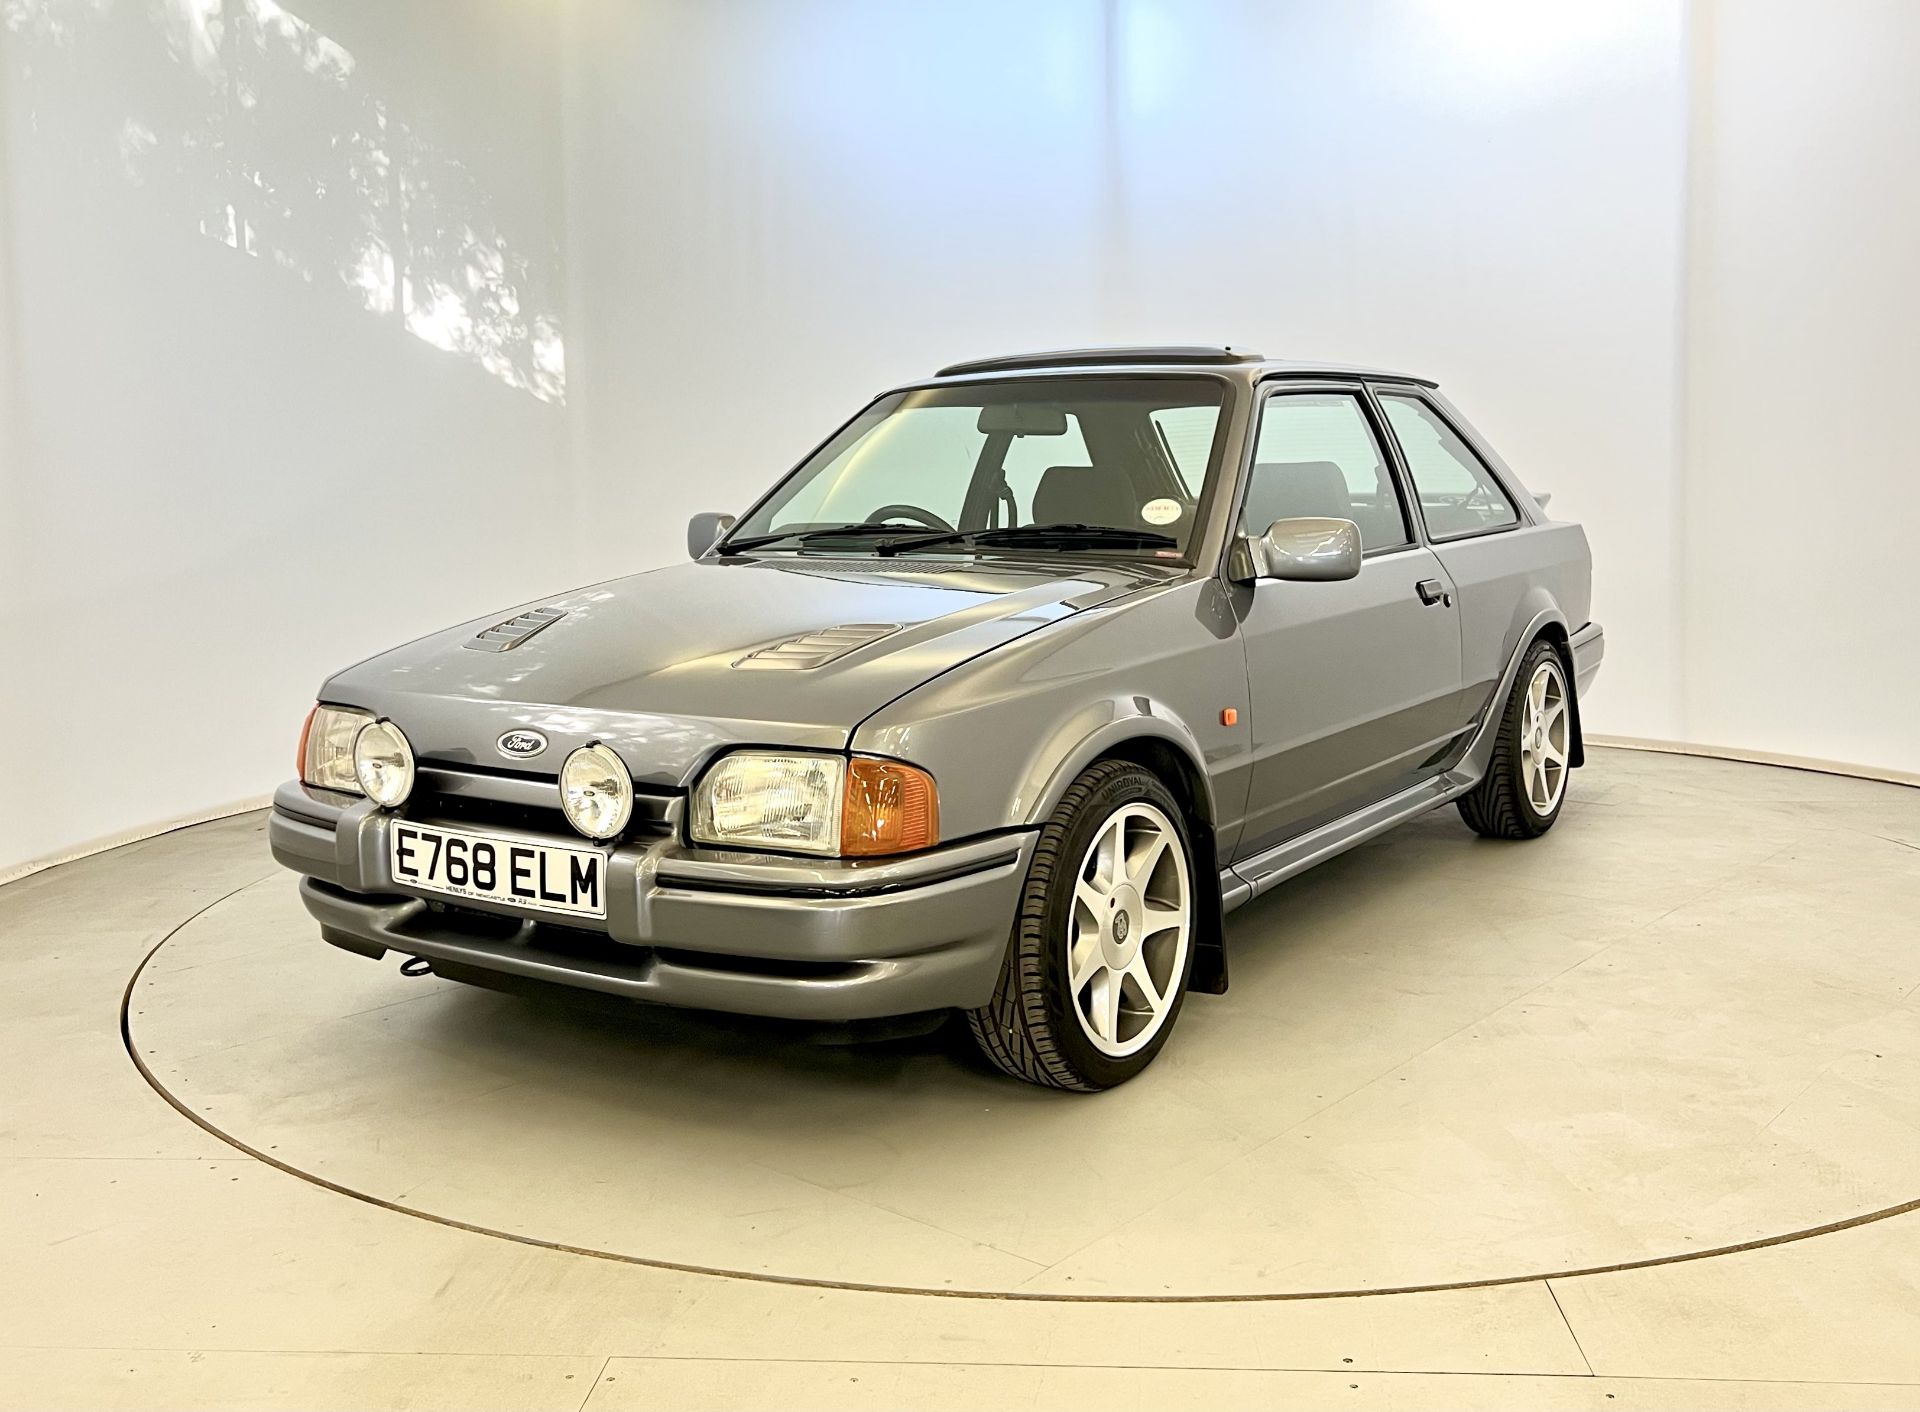 Ford Escort RS Turbo - Image 3 of 34